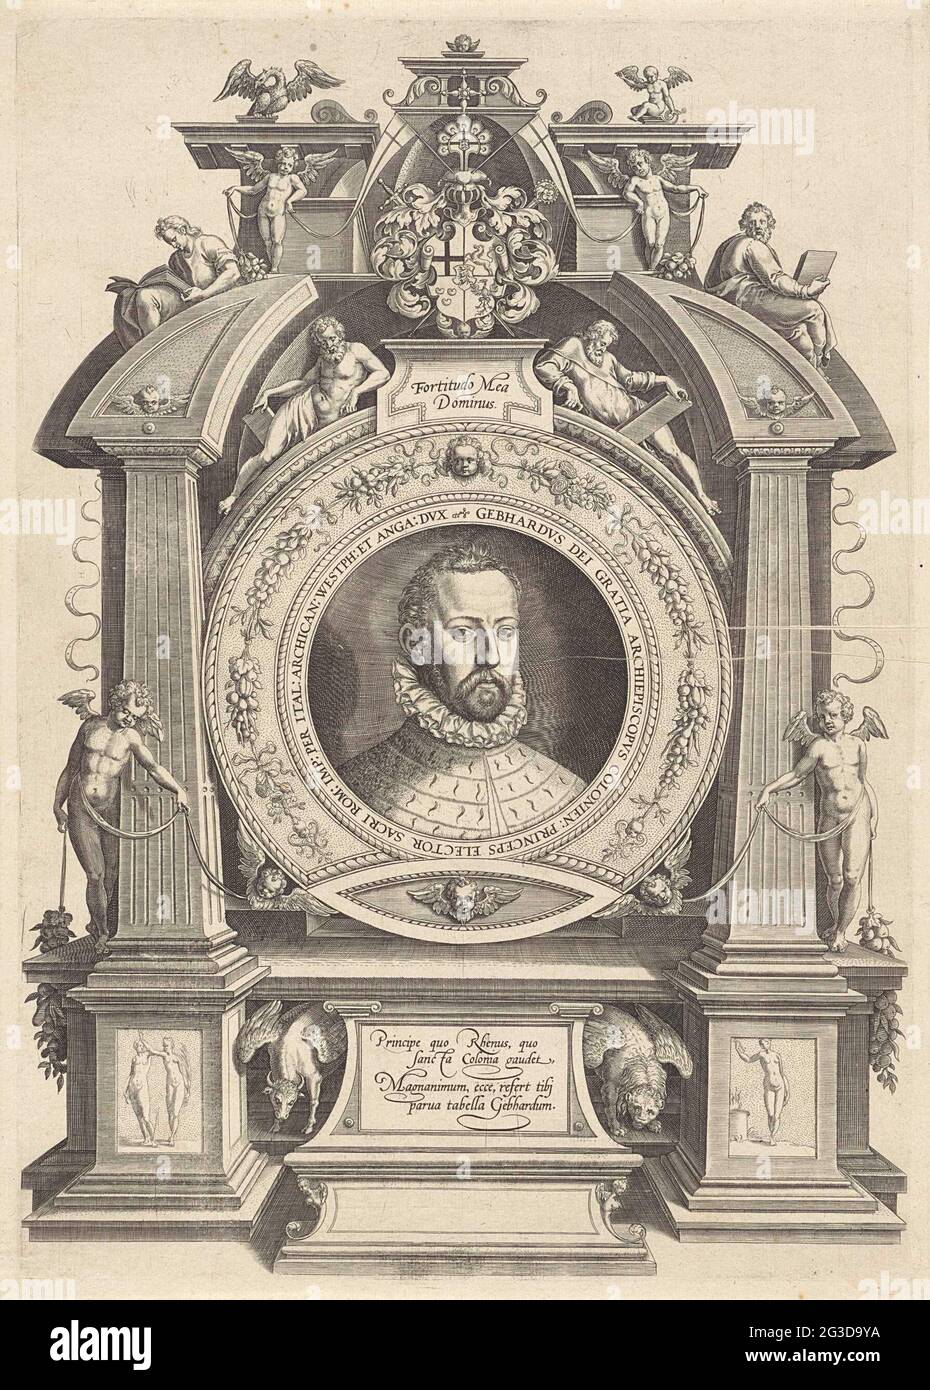 Portrait of Gebhard Truchsess von Waldburg-Trauchburg. Gebhard Truchsess Von Waldburg-Trauchburg, Archbishop and Keurvorst van Keulen. Bust in round list with peripheral and flower drinks, caught in architectural picture frame with four prophets at the top. In the middle of Waldburg's coat of arms, flanked by Putti, with the Latin text 'Fortitudo Mea Dominus' in a cartouche. Above and below the symbols of the evangelists. Stock Photo